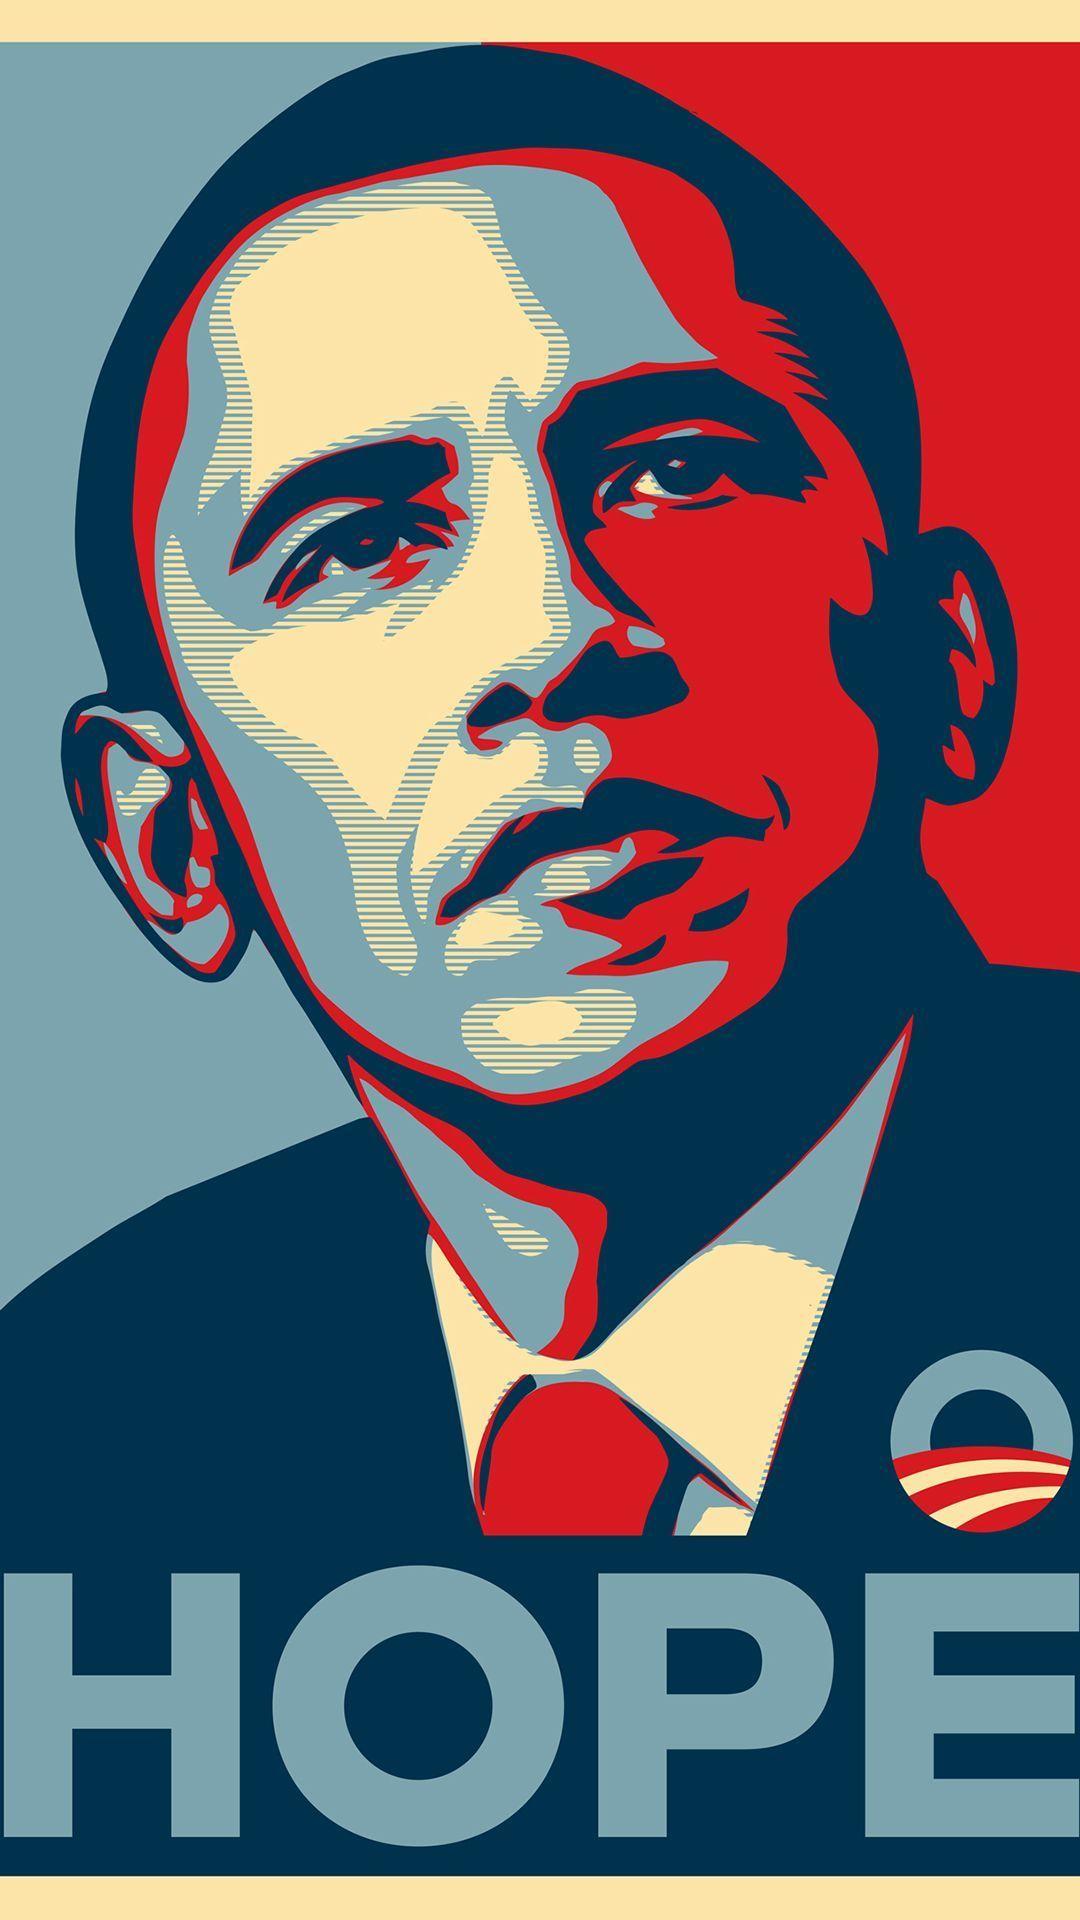 Obama Hope htc one wallpaper, free and easy to download